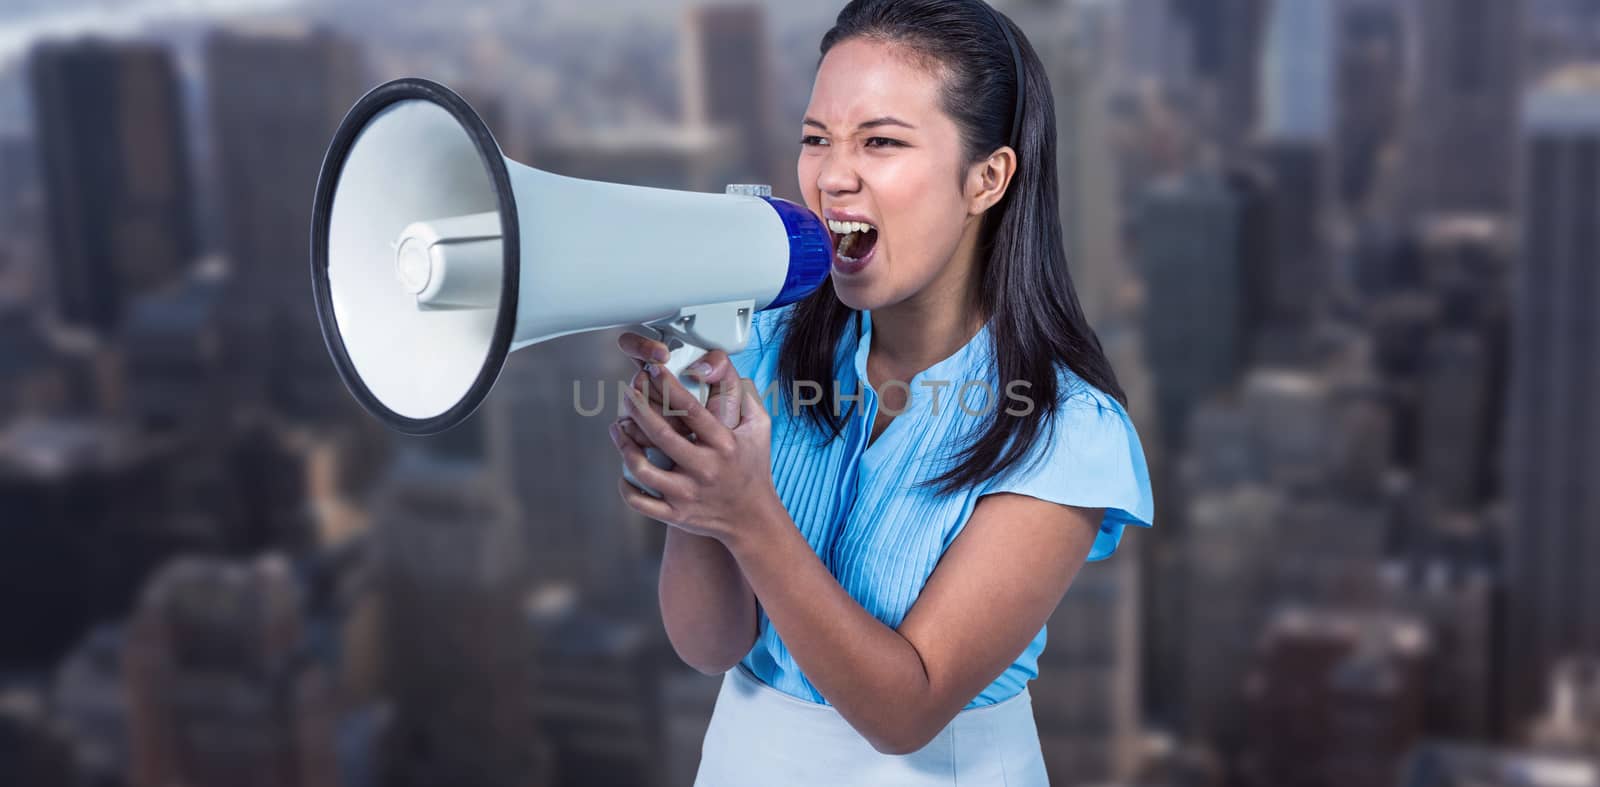 Composite image of businesswoman shouting into a megaphone by Wavebreakmedia